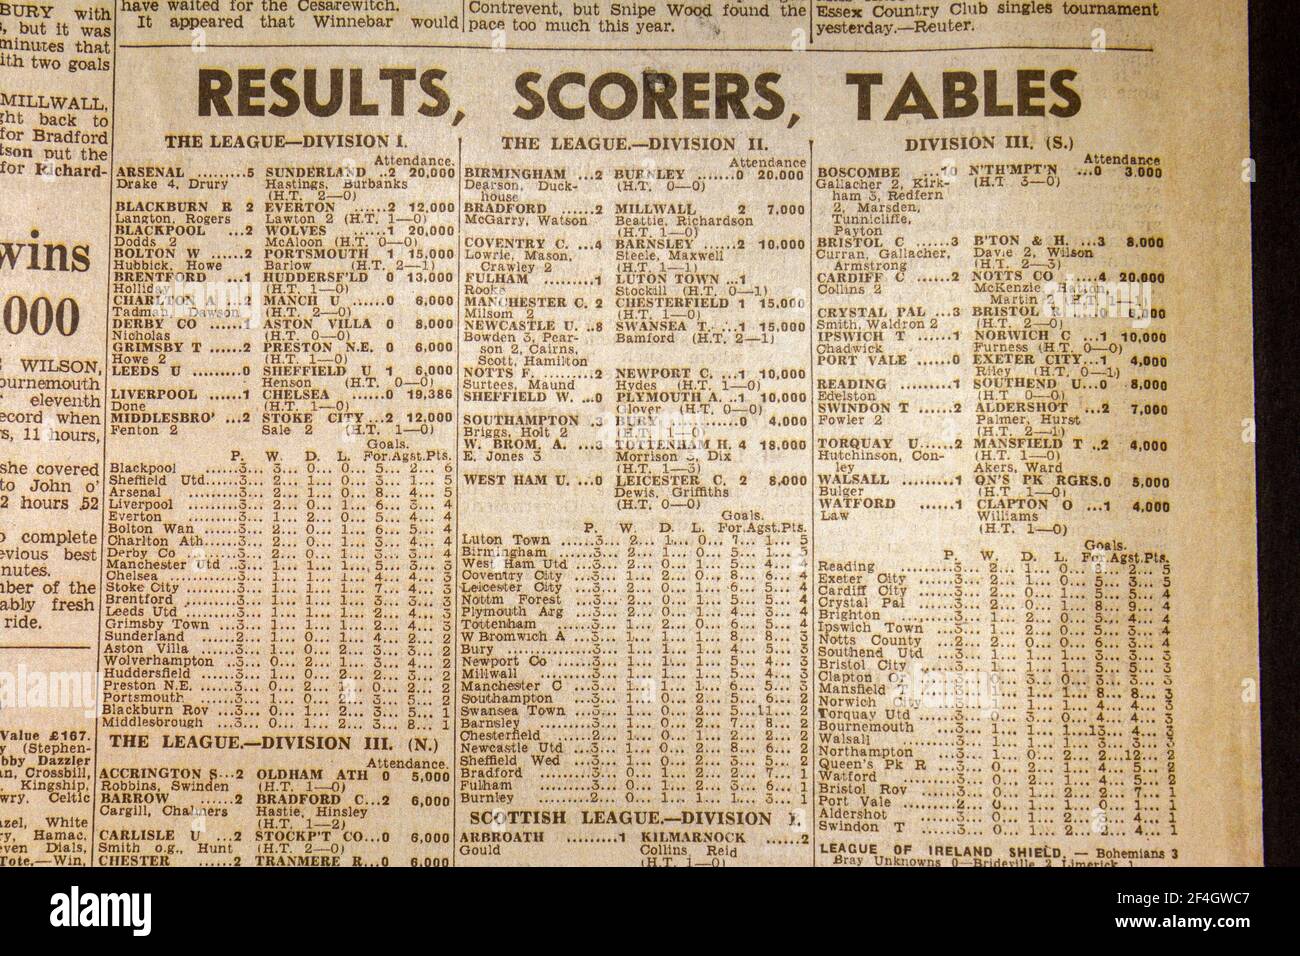 Football league results,scorers and tables in The Daily Express (replica), 4th September 1939, the day after World War II was declared. Stock Photo